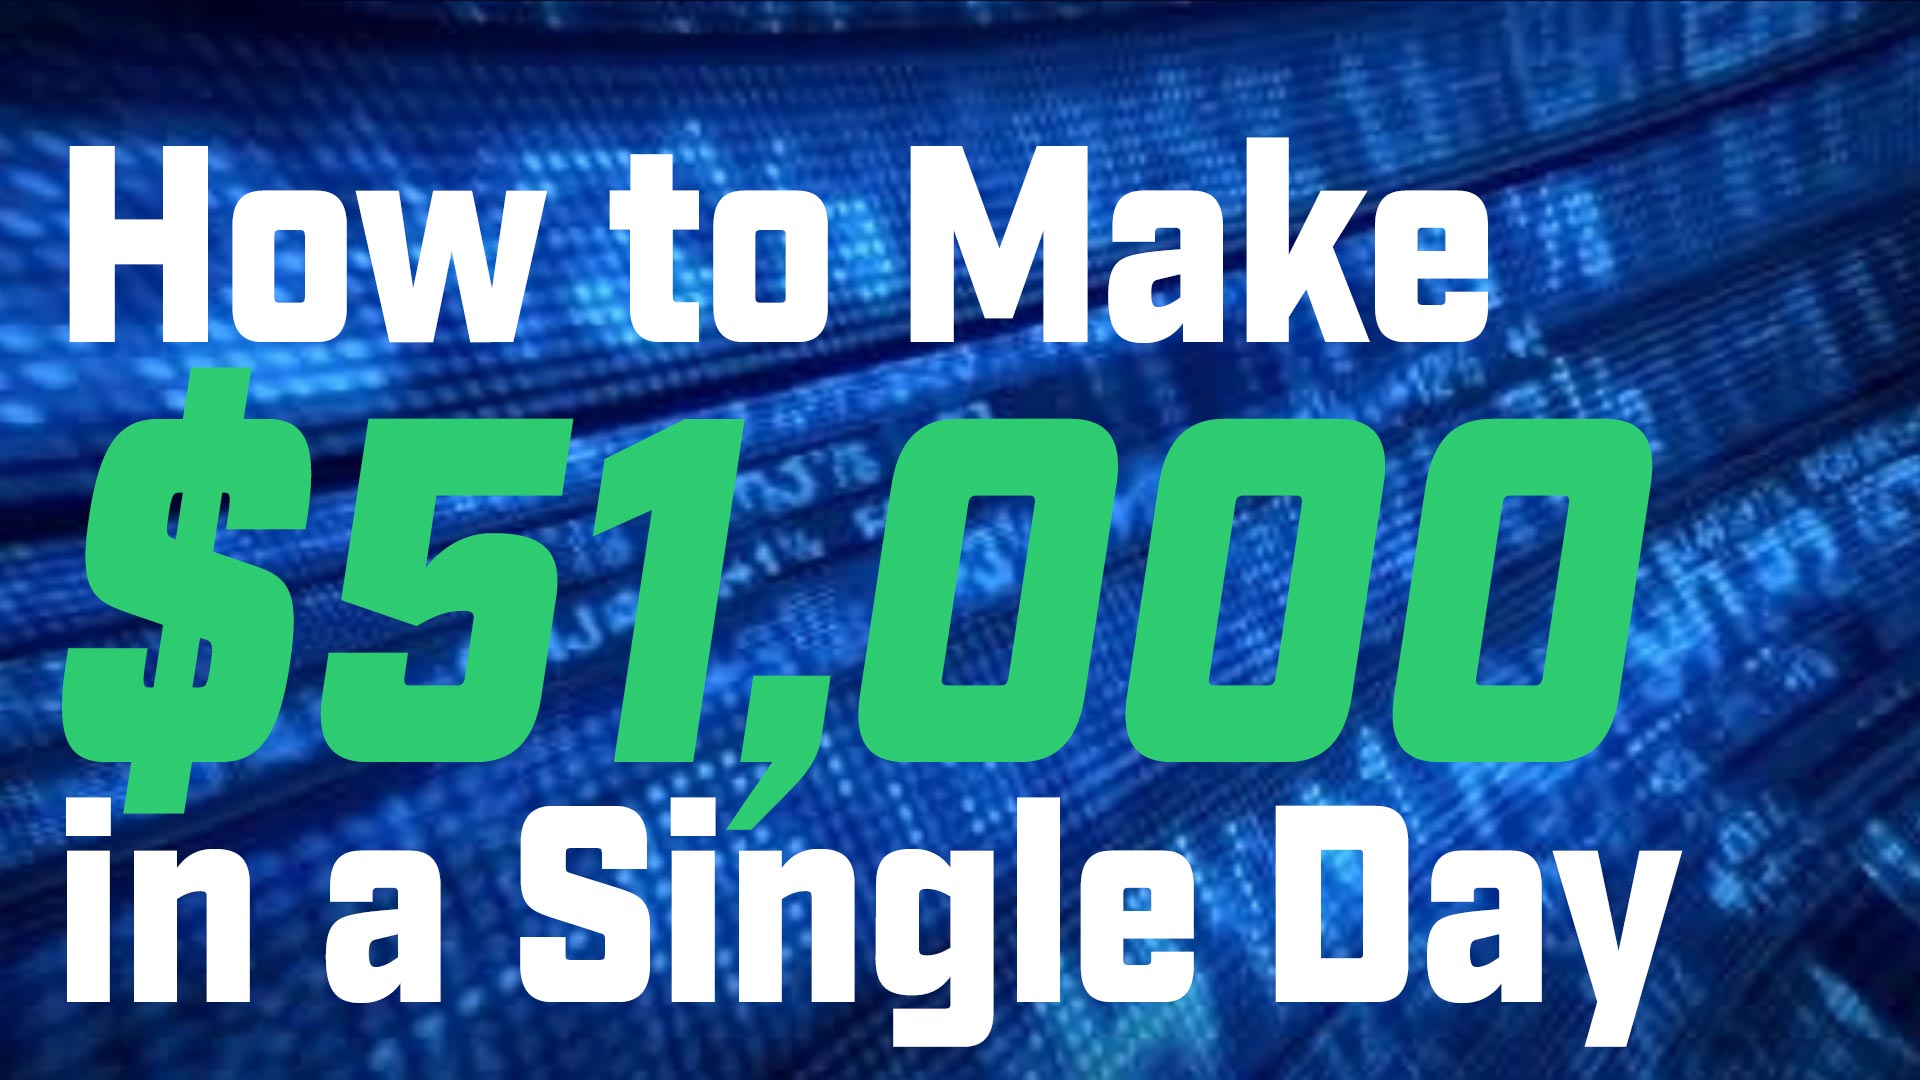 How to Make $51,000 in a Single Day